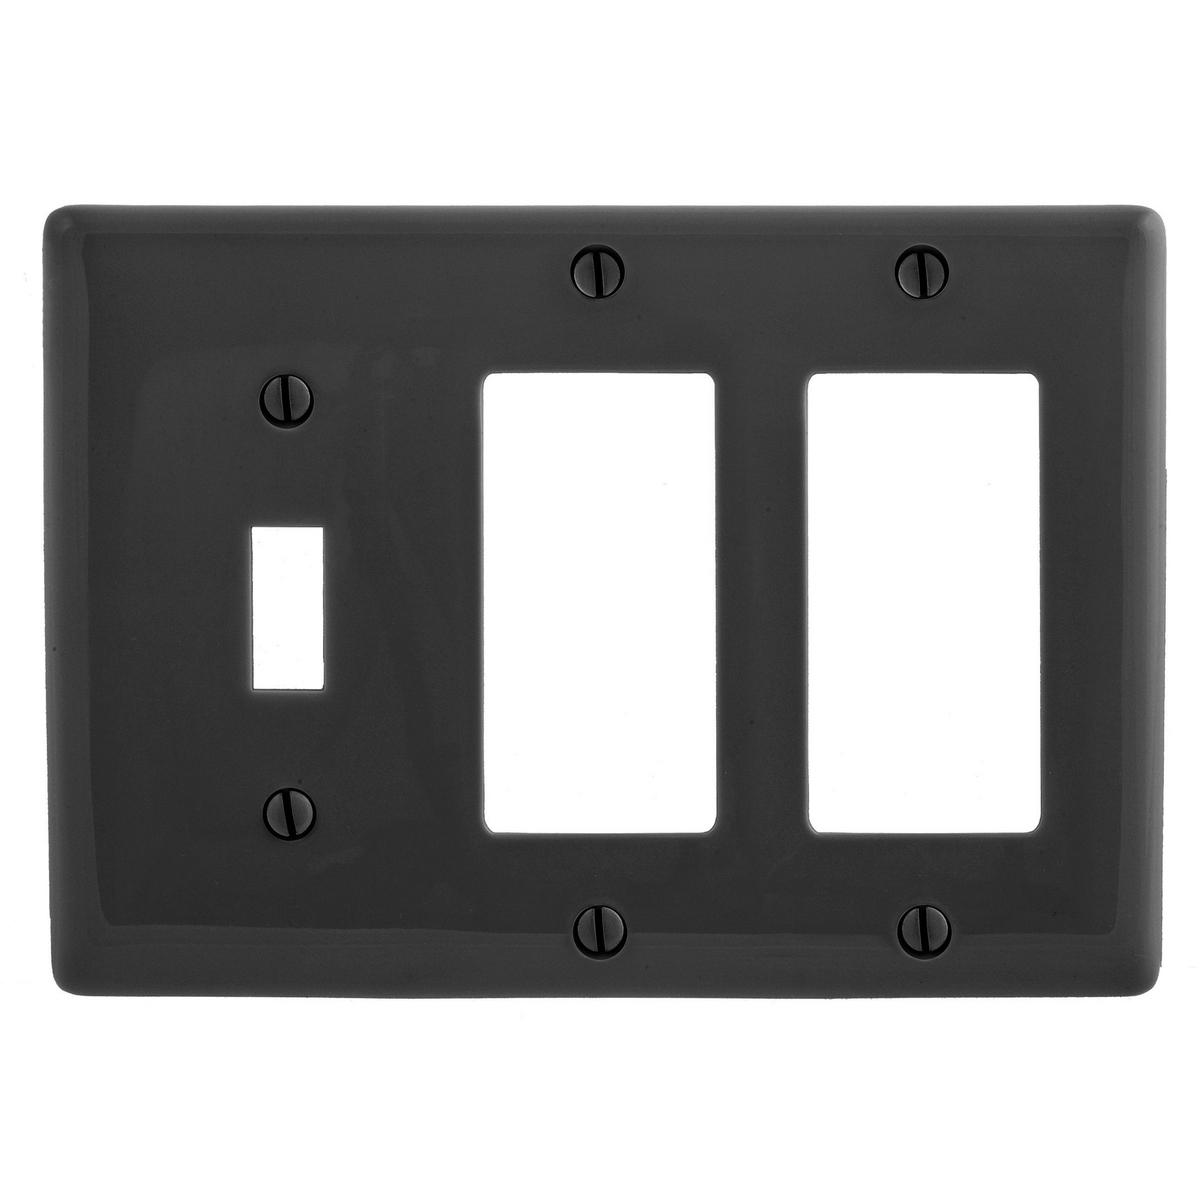 Hubbell NP1262BK Wallplates, Nylon, 3-Gang, 1) Toggle, 2) Decorator, Black  ; Reinforcement ribs for extra strength ; High-impact, self-extinguishing nylon material ; Captive screw feature holds mounting screw in place ; Standard Size is 1/8" larger to give you extra cove